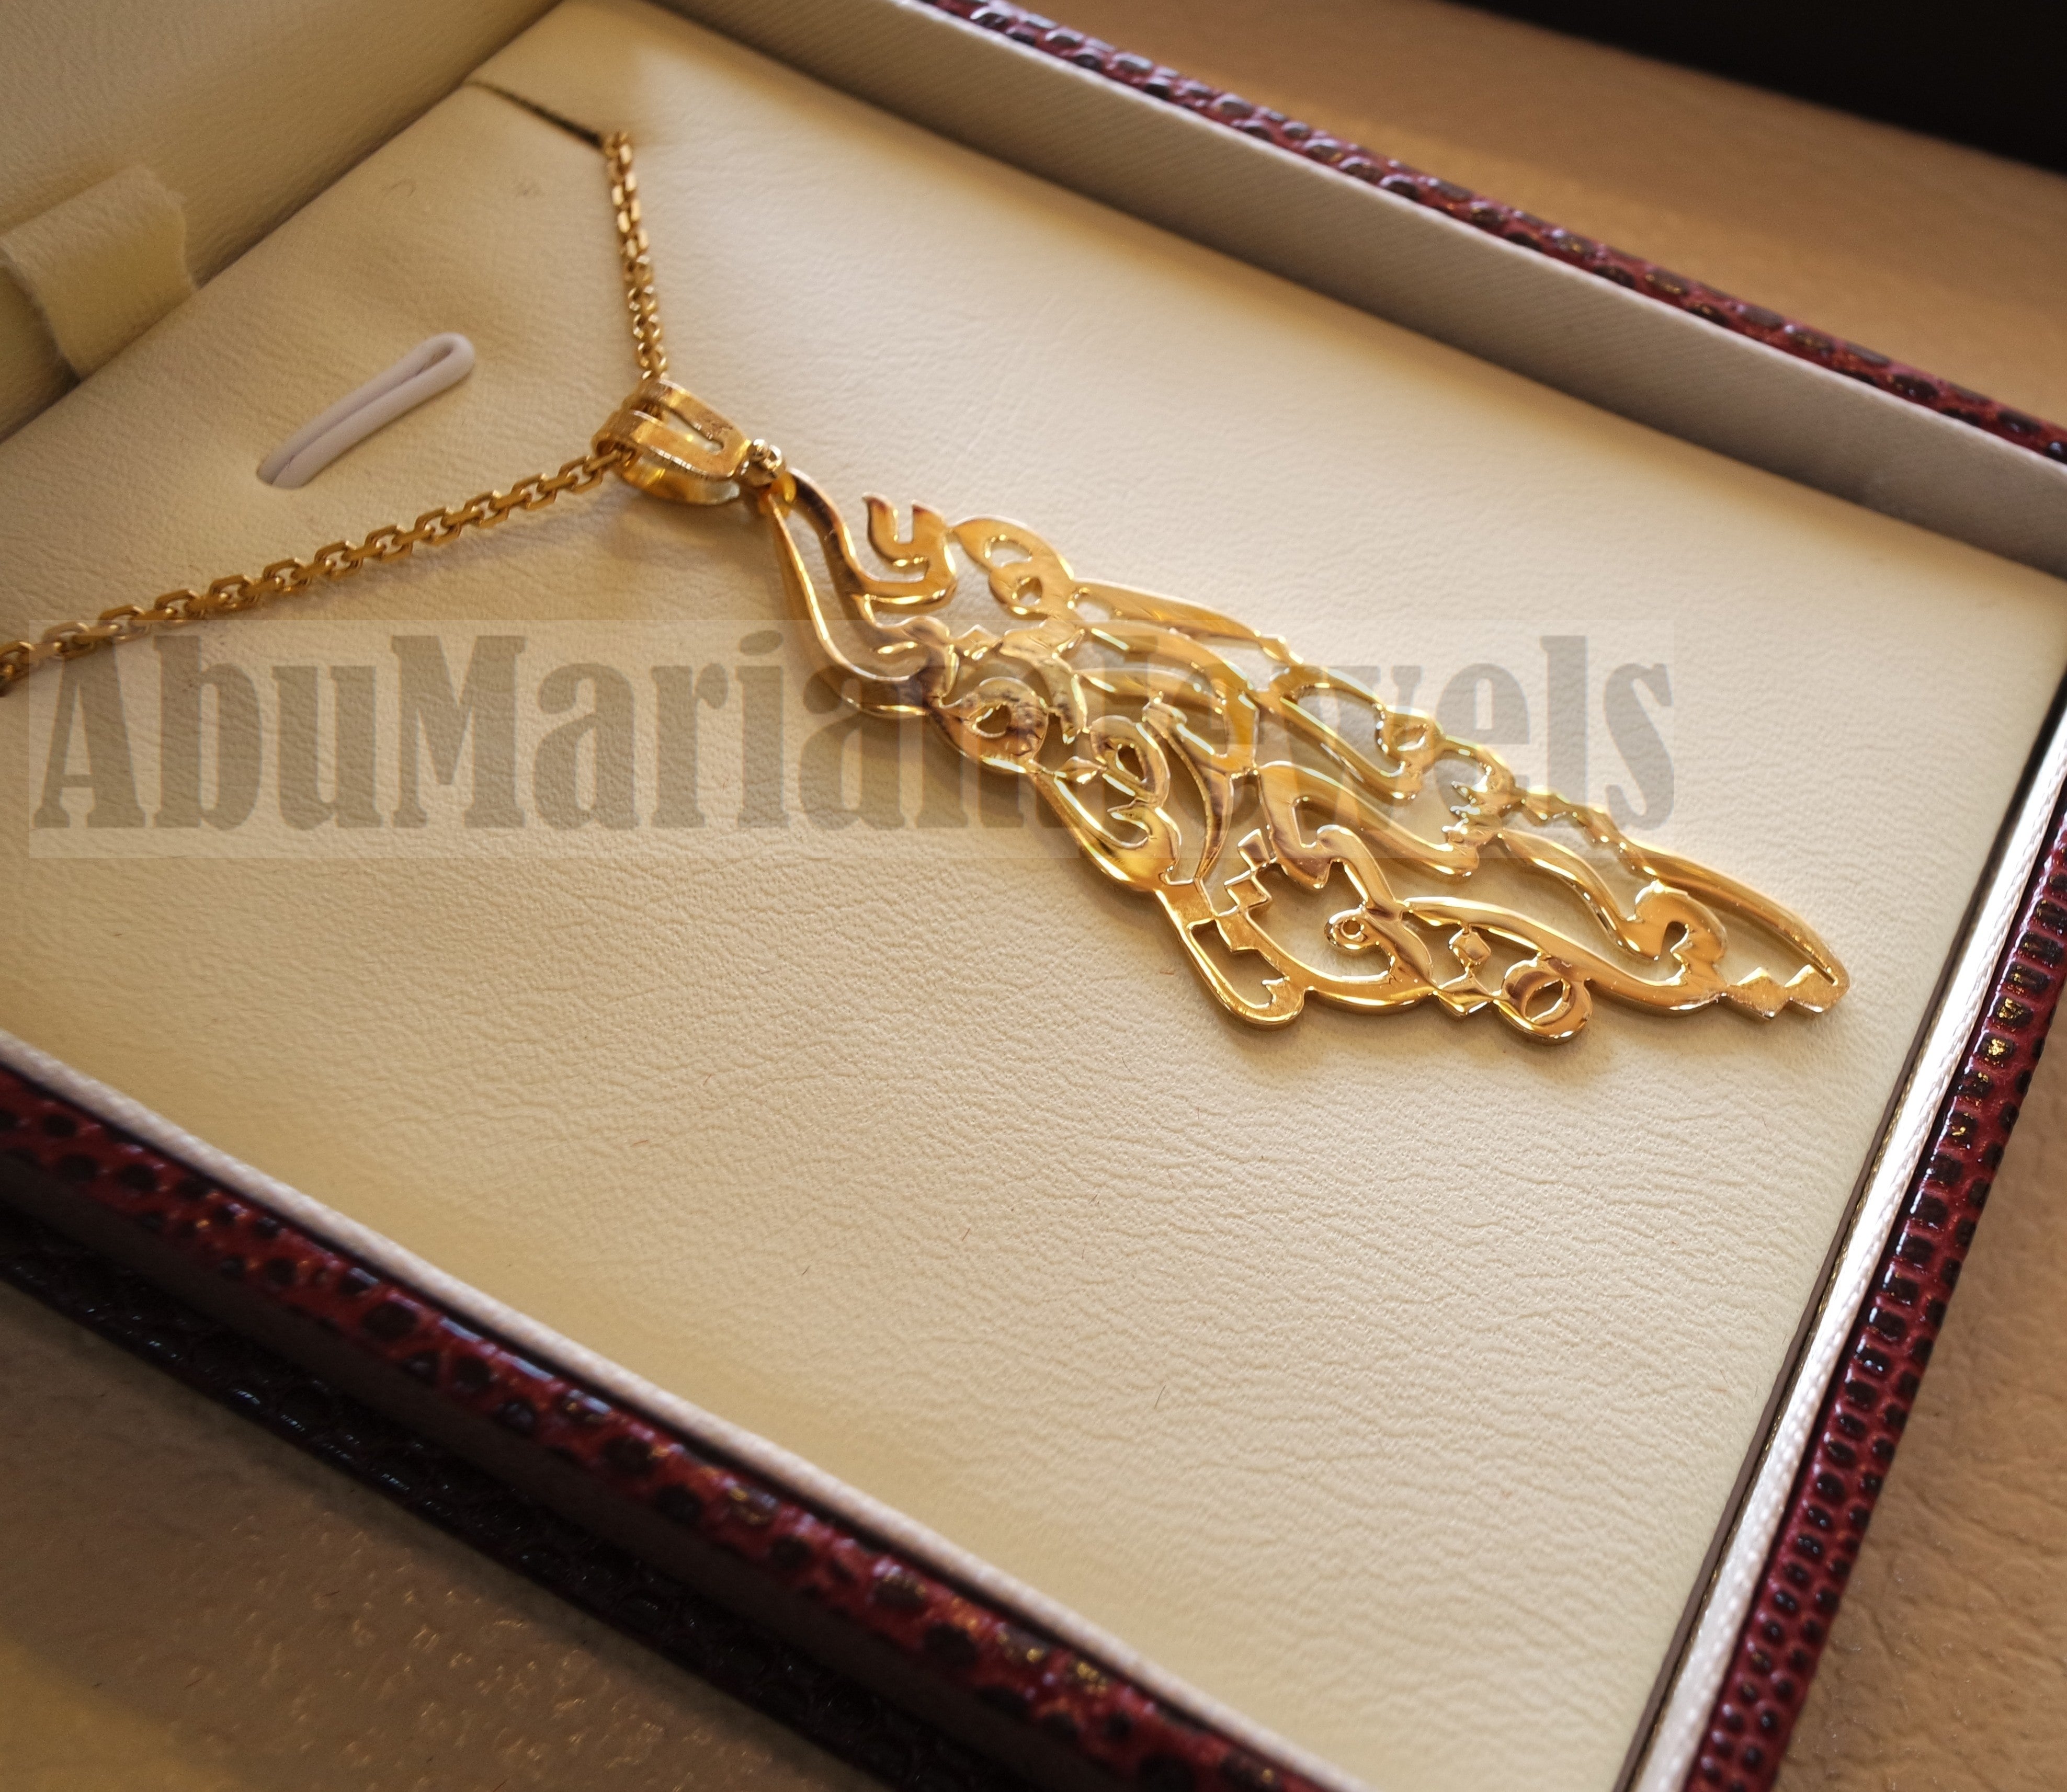 Big Palestine map pendant with chain famous poem verse 18 k gold jewelry arabic fast shipping خارطه و علم فلسطين